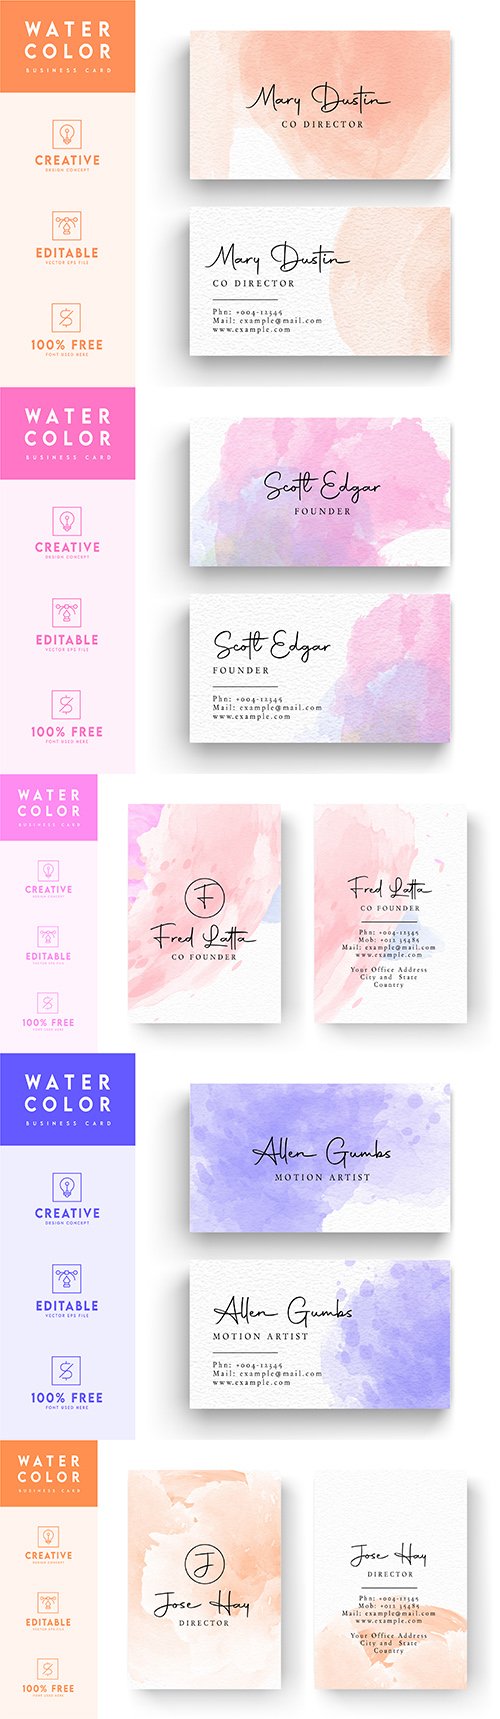 Business card modern art watercolor with decorative inscriptions